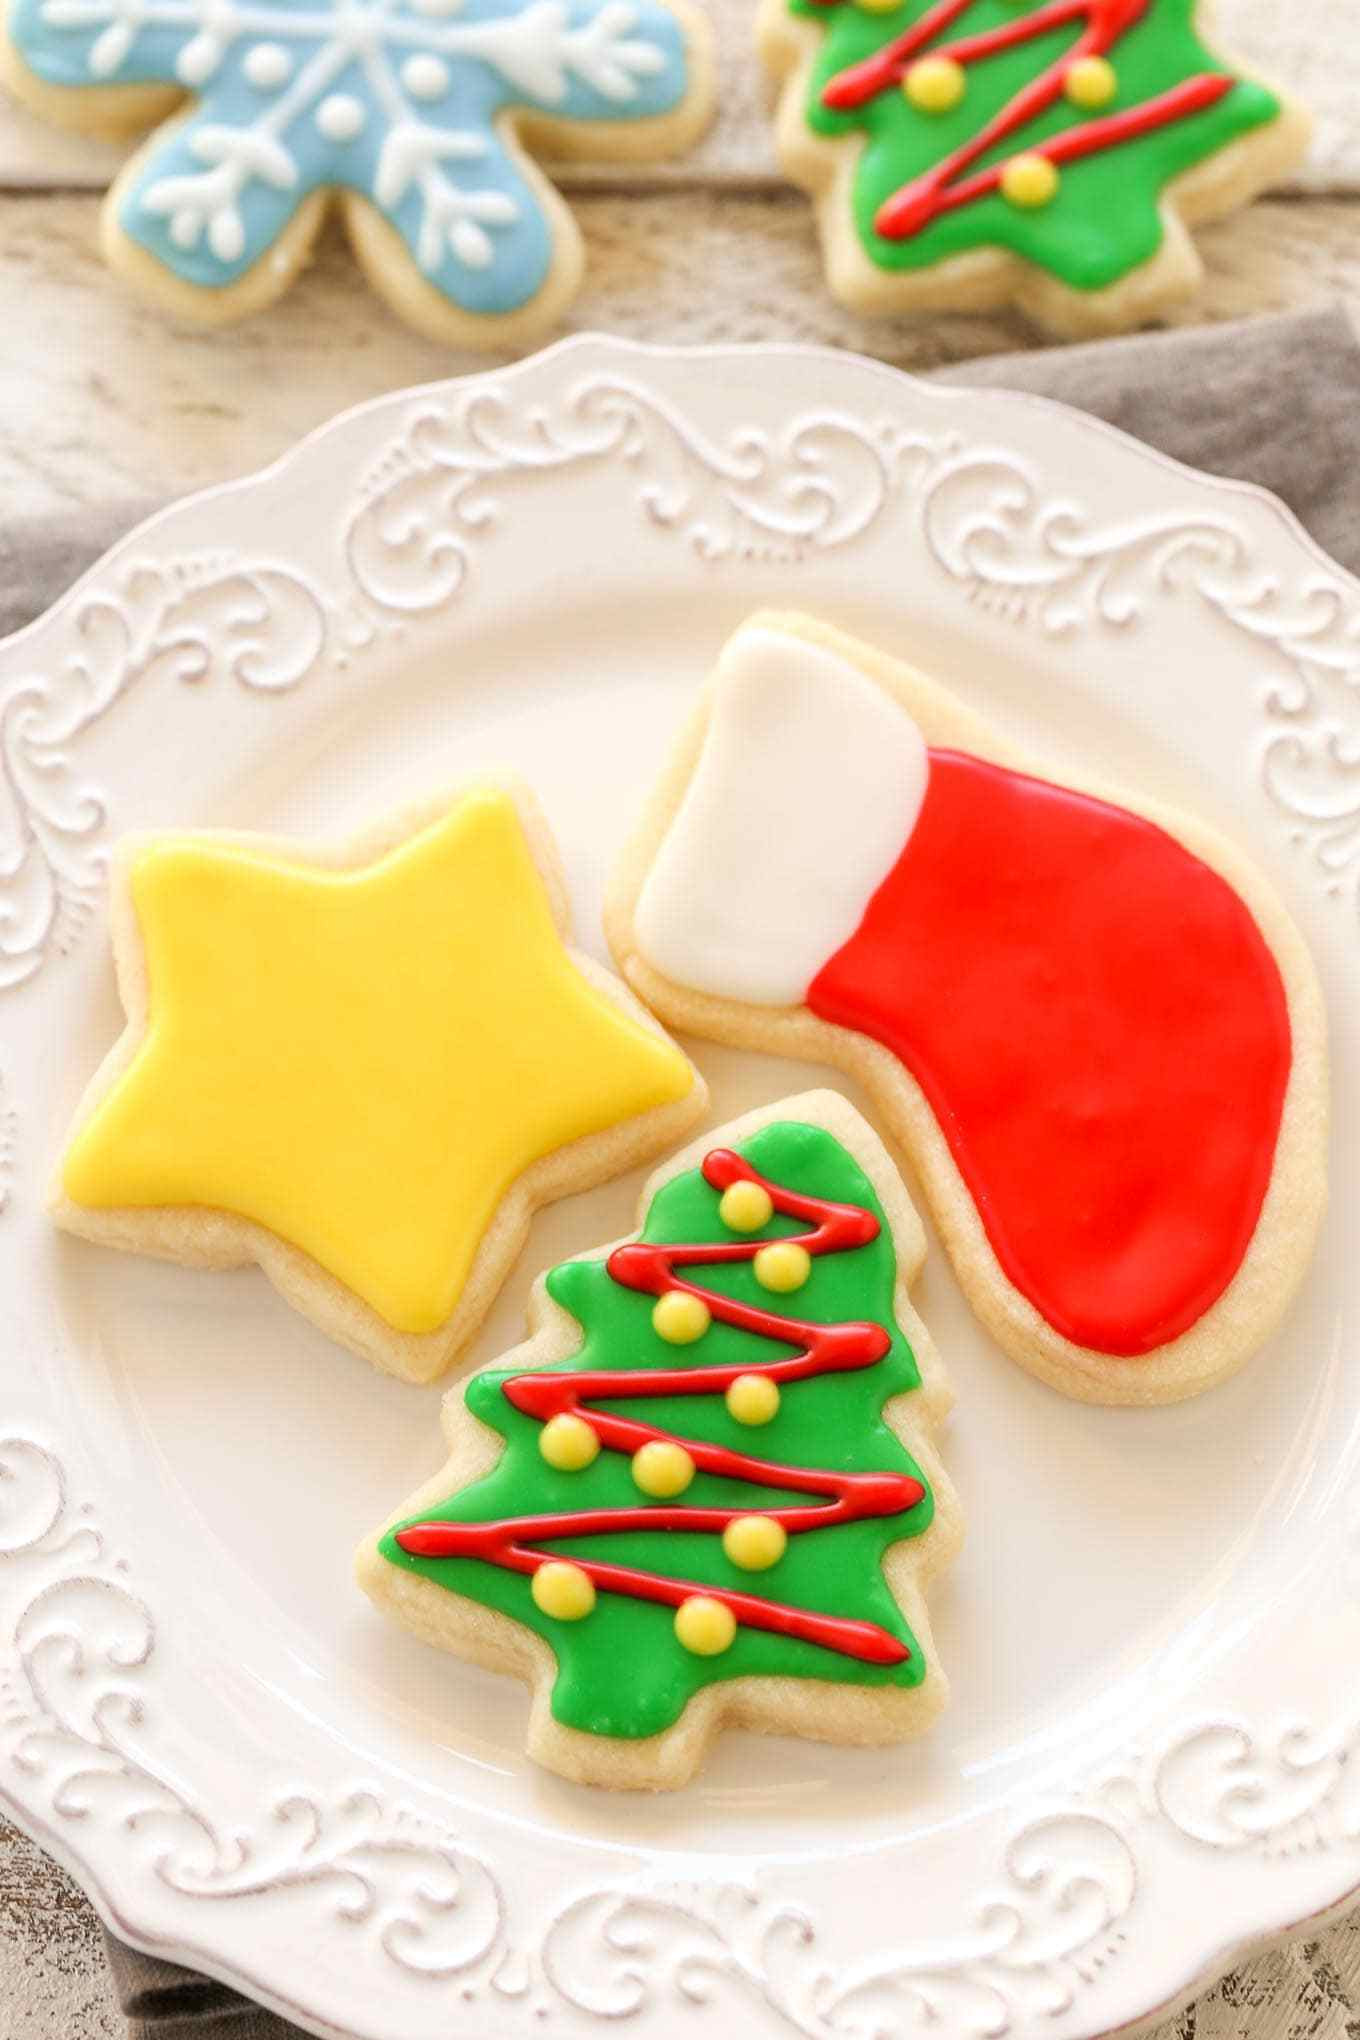 Cookie Decorating Icing Recipe
 Soft Christmas Cut Out Sugar Cookies Live Well Bake ten